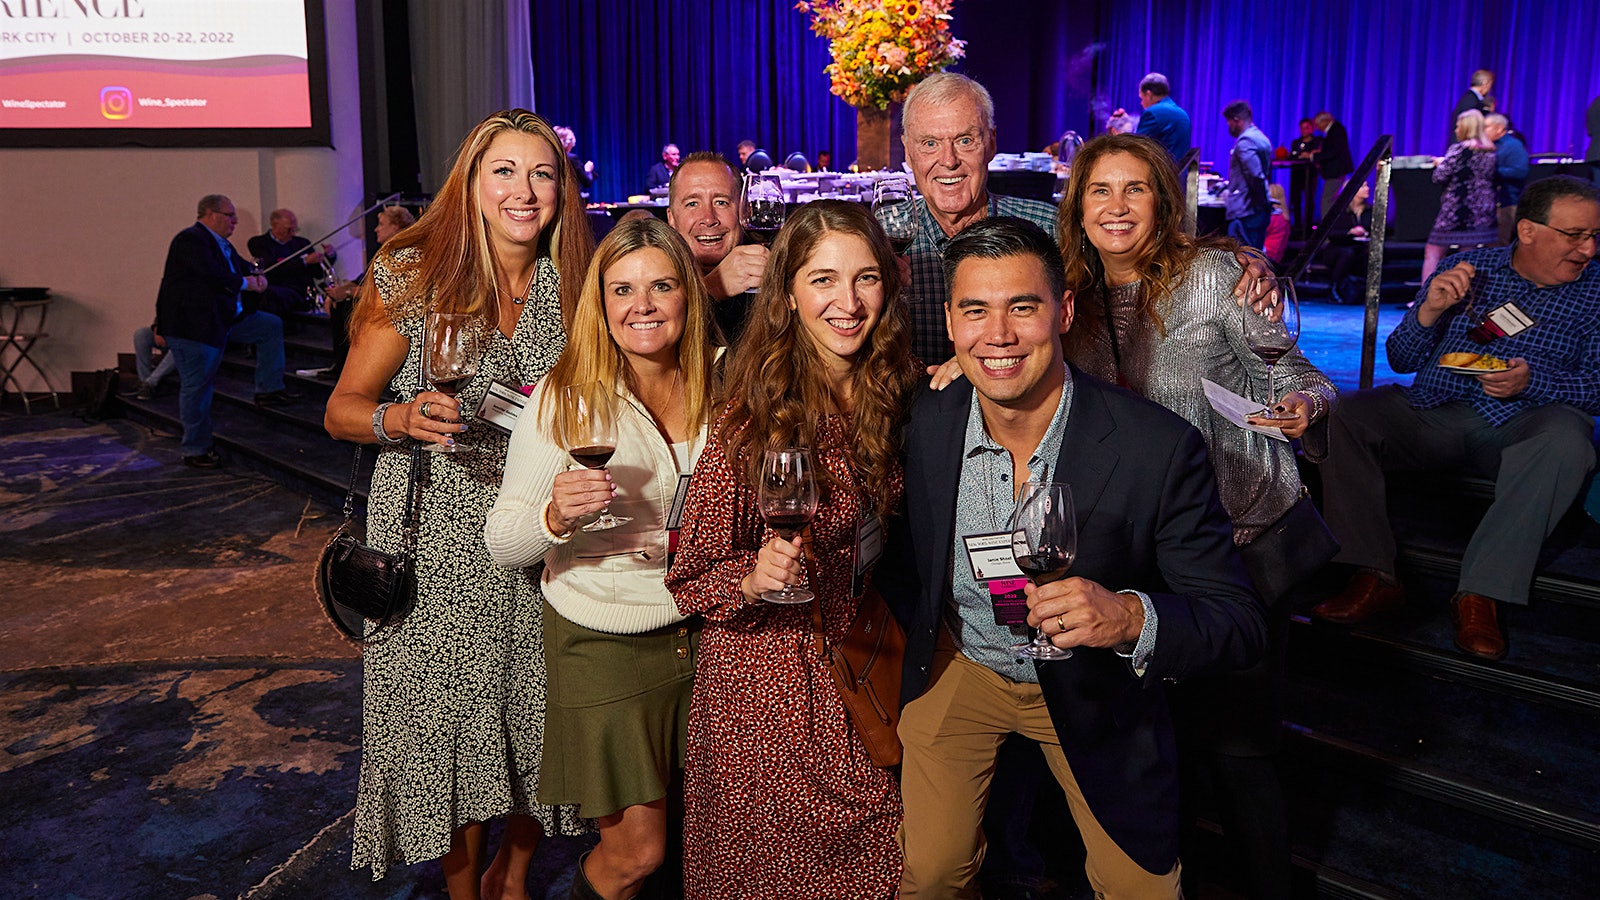  A group of guests, some repeat attendees and some first-time visitors, enjoying themselves at the 2022 New York Wine Experience